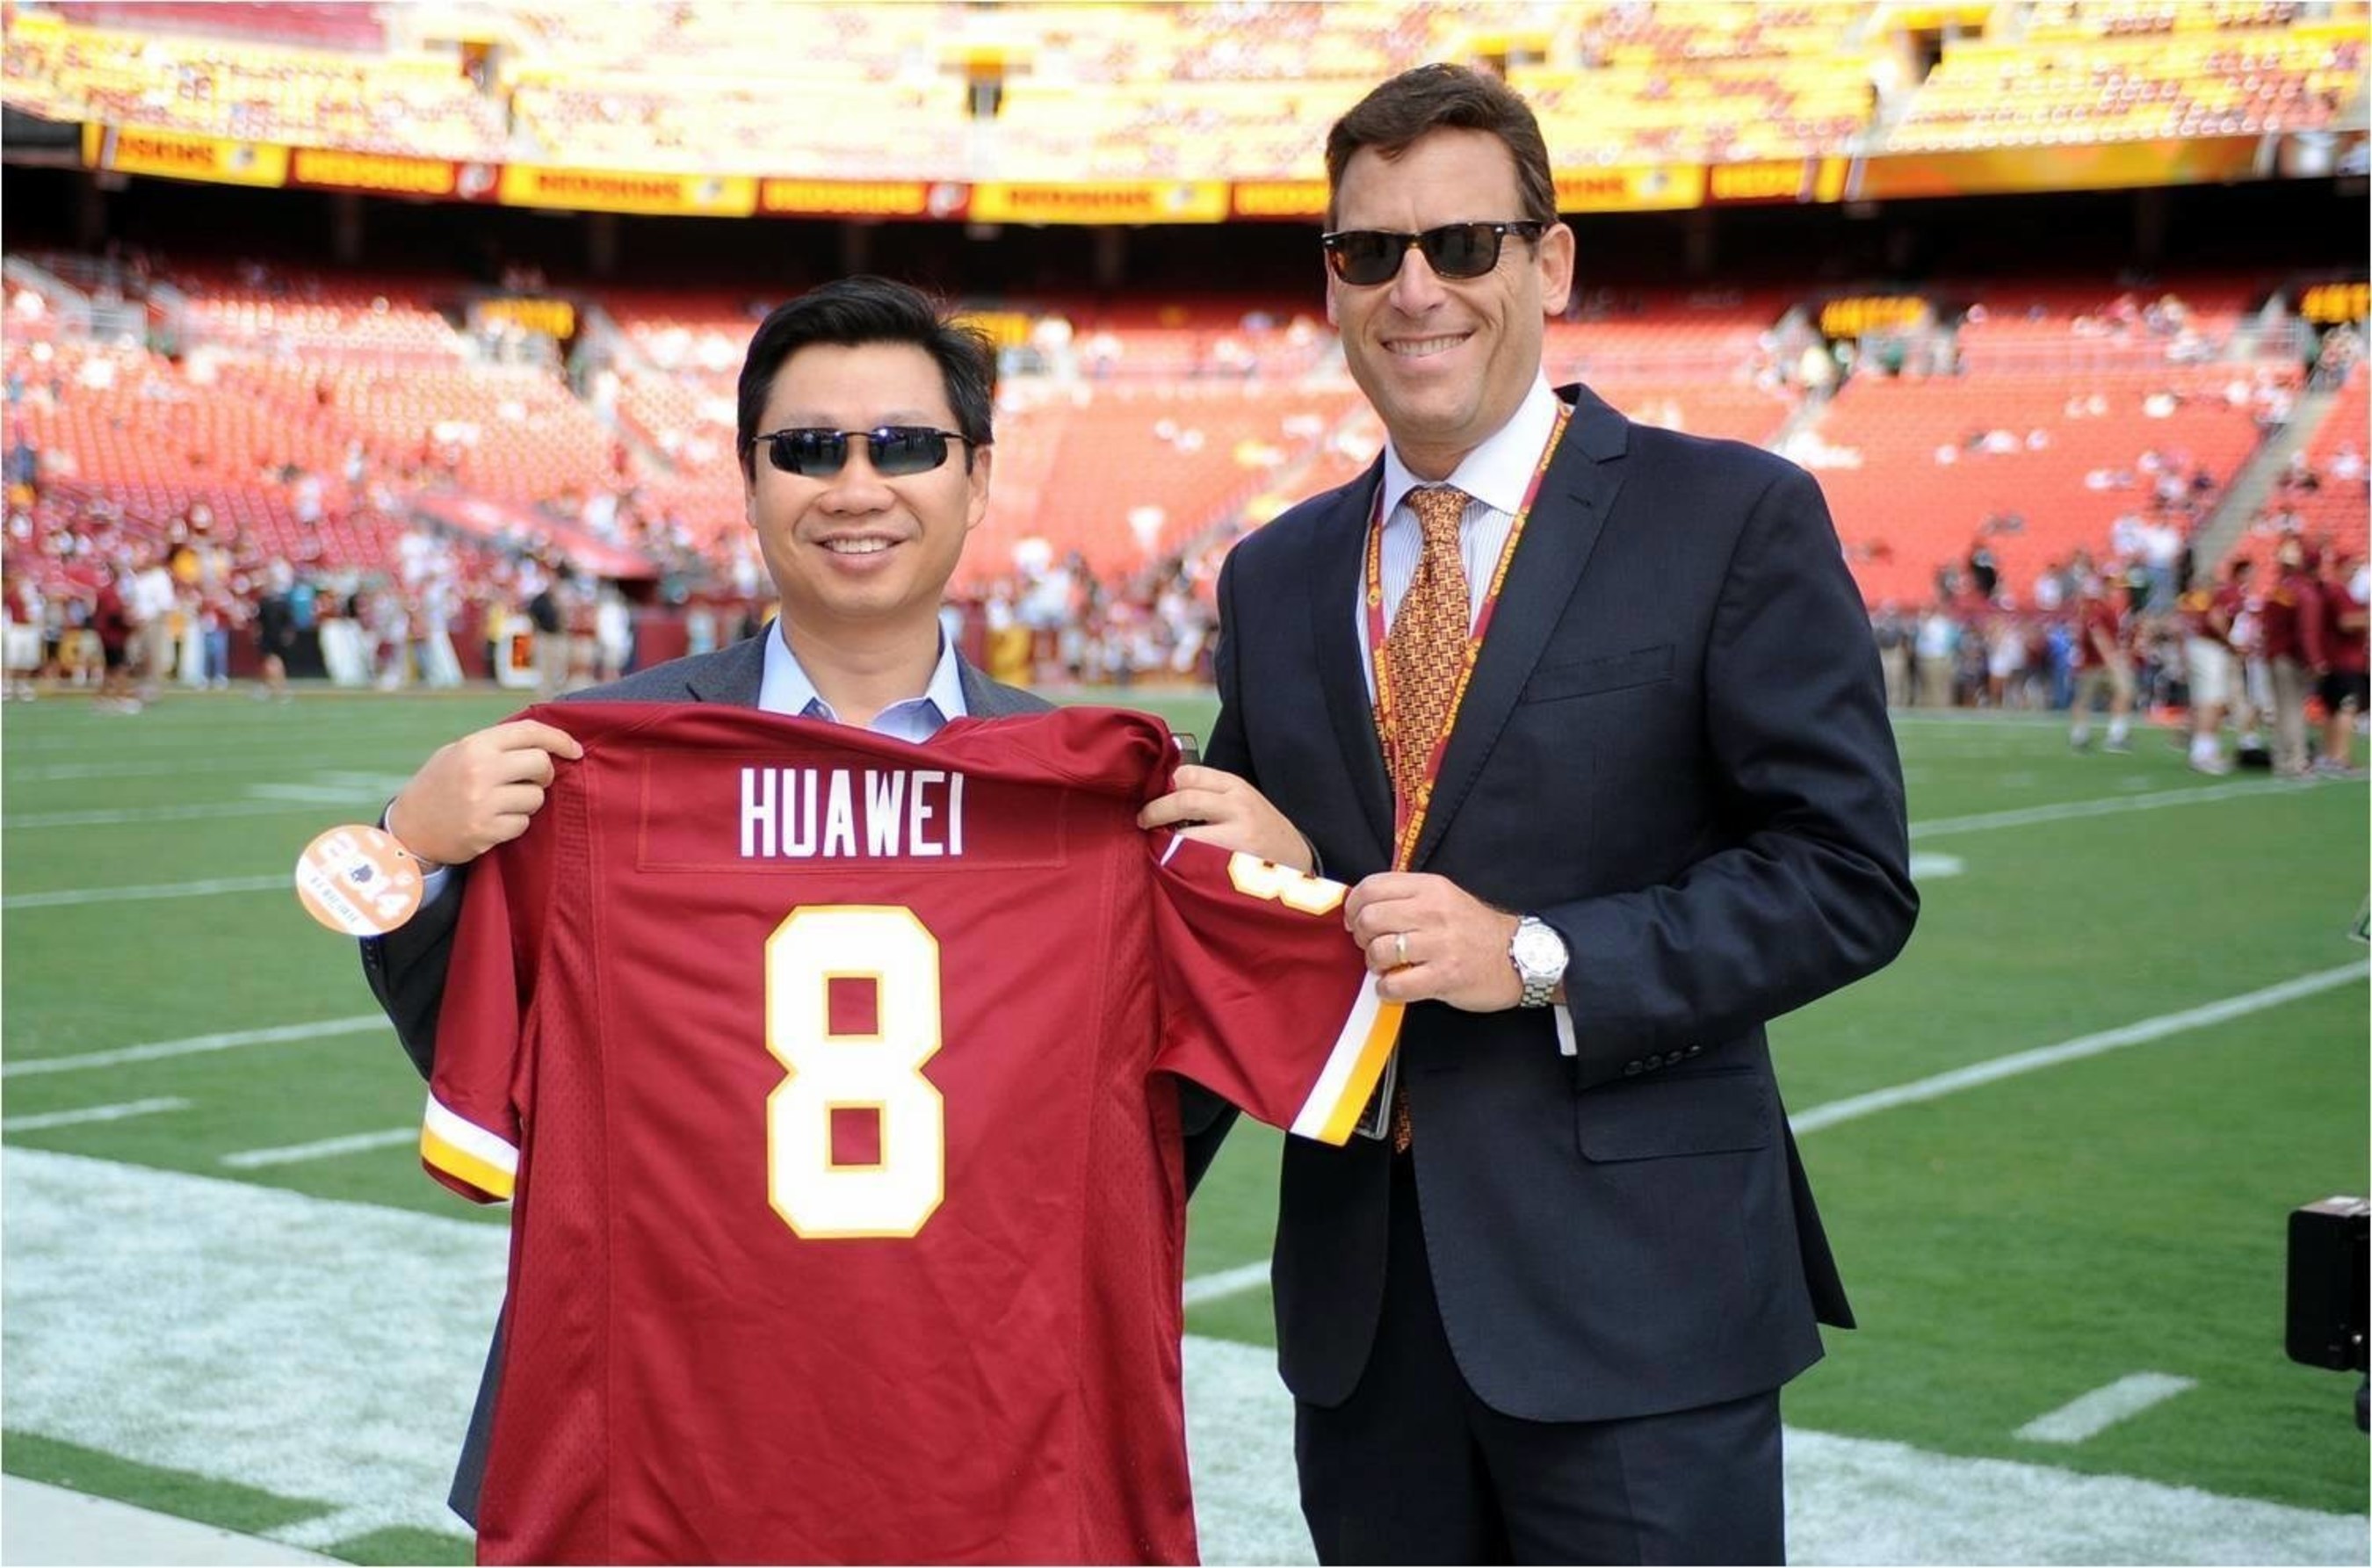 Ming He, Country General Manager for Huawei in the U.S. (left), and Rod Nenner, Vice President of the Washington Redskins (right), today announced the team sponsorship and partnership